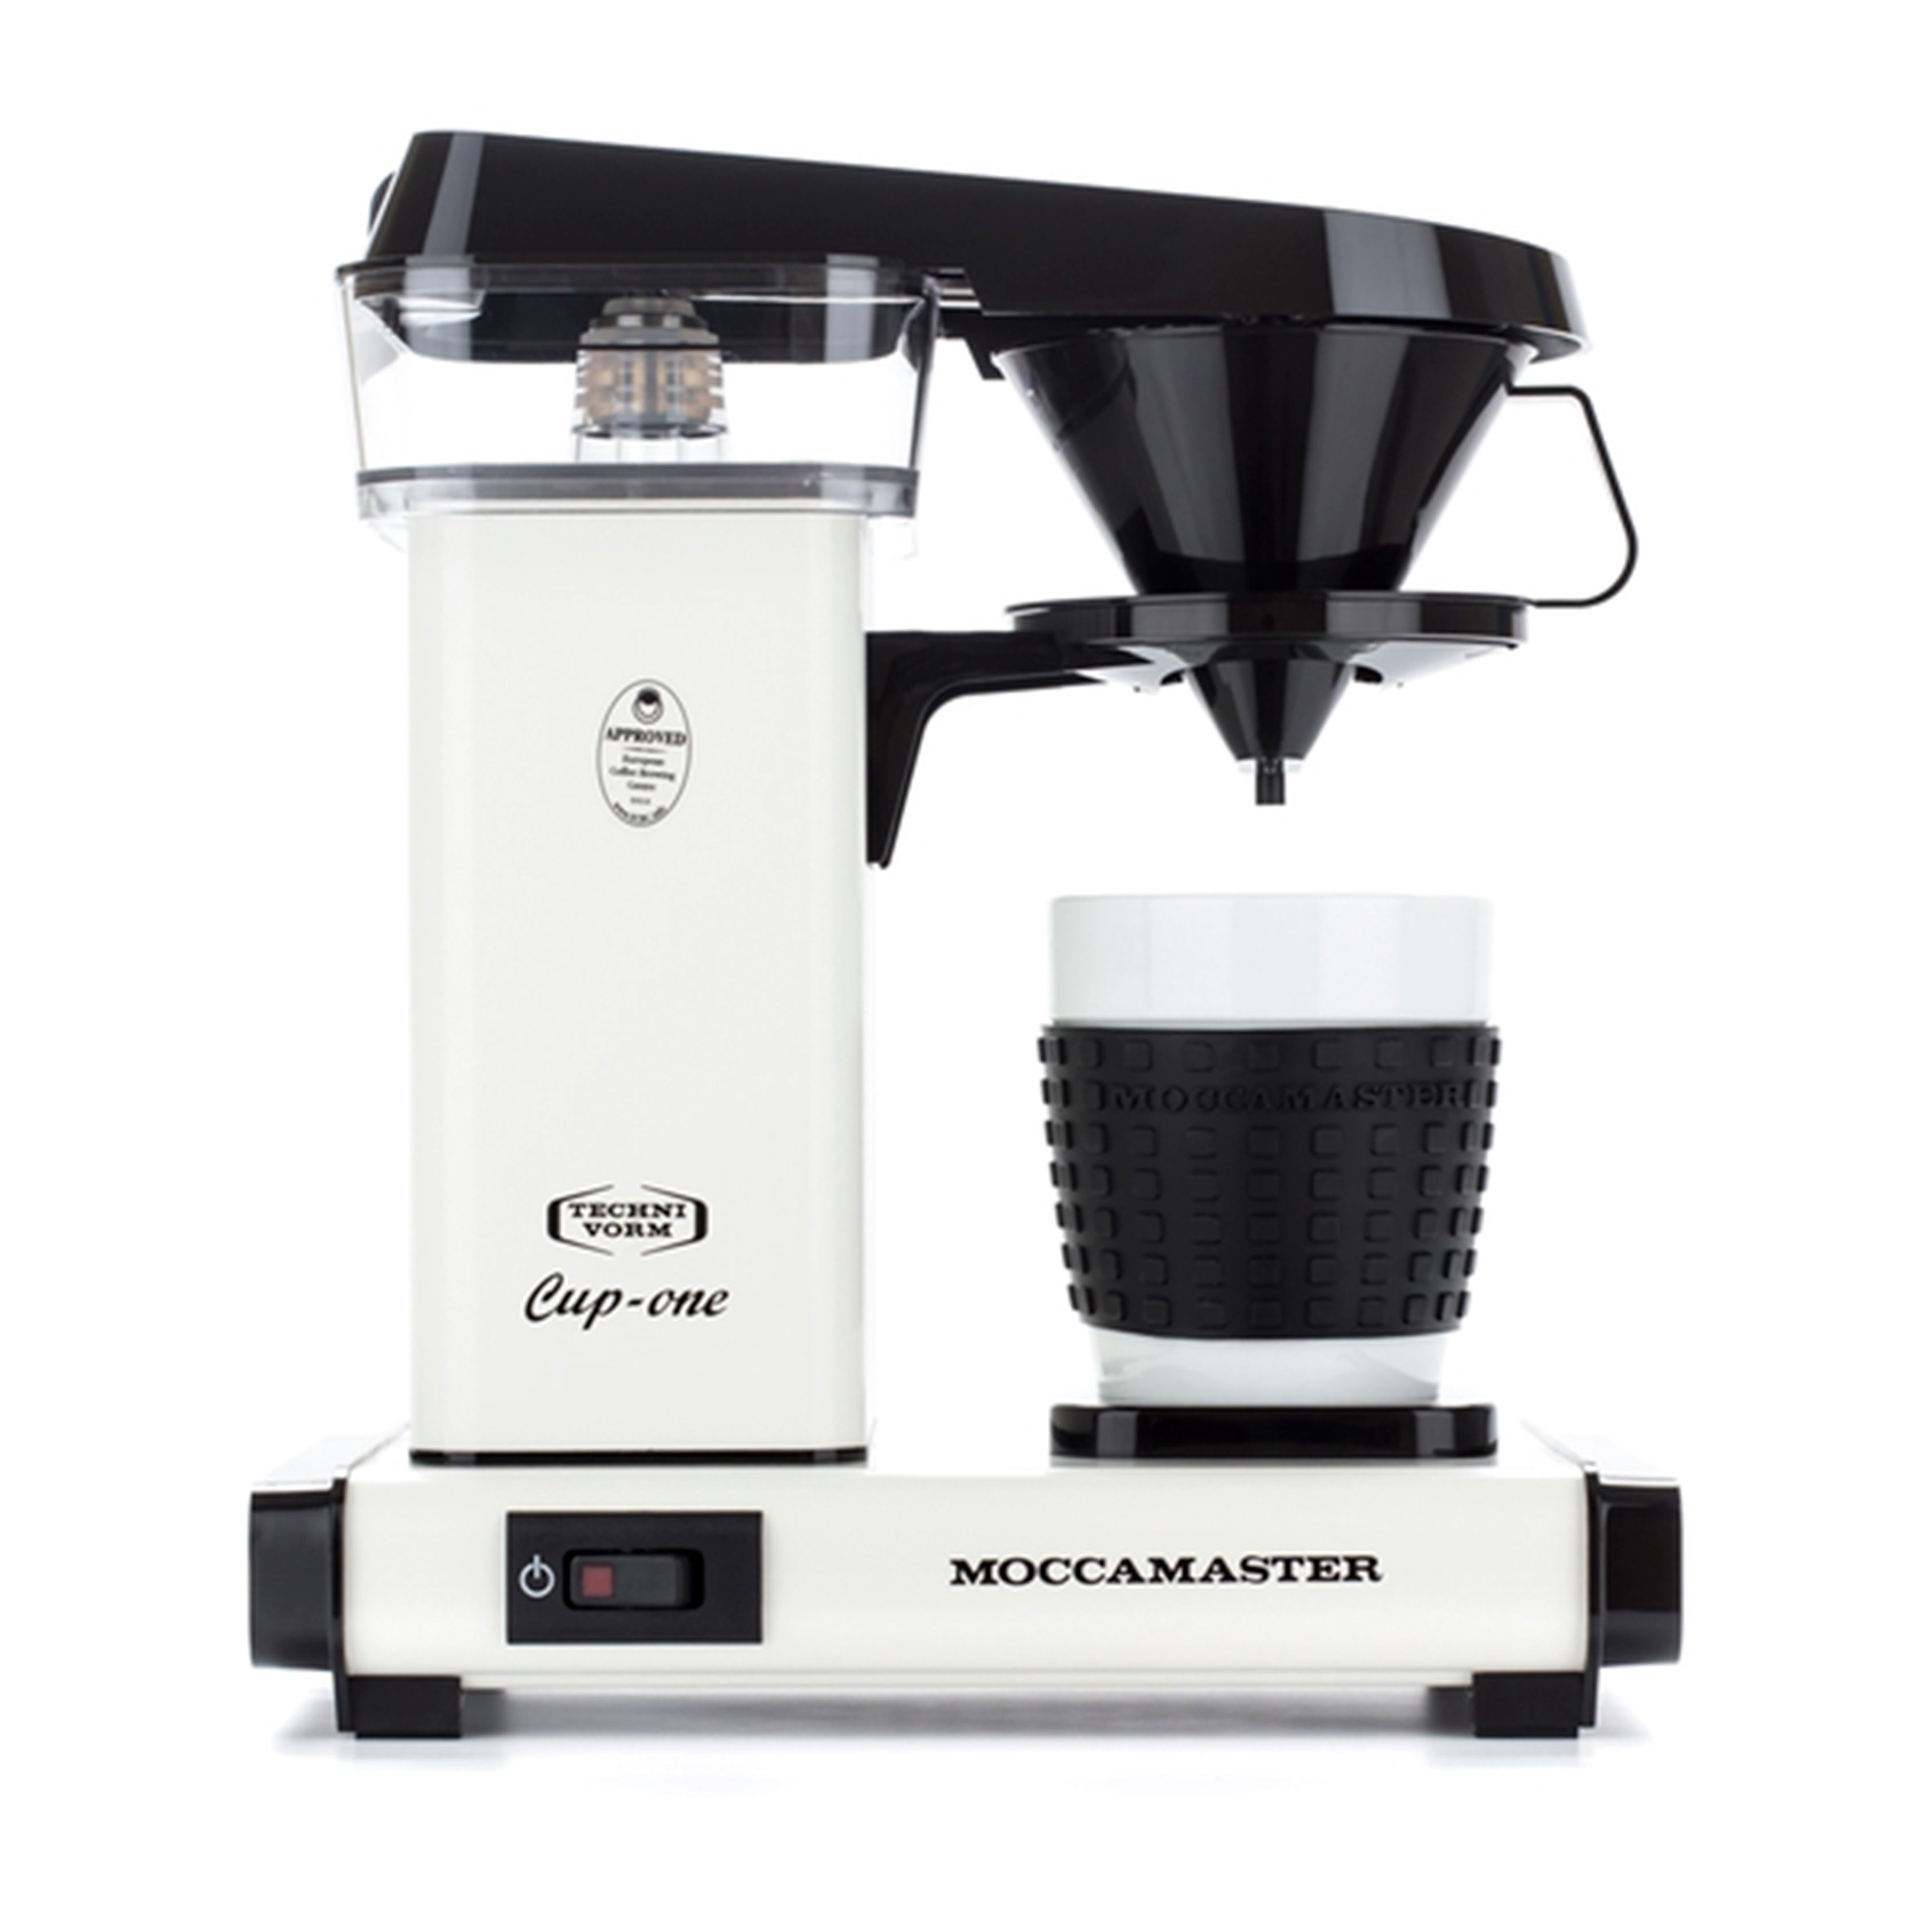 Moccamaster Cup-One Coffee Brewer